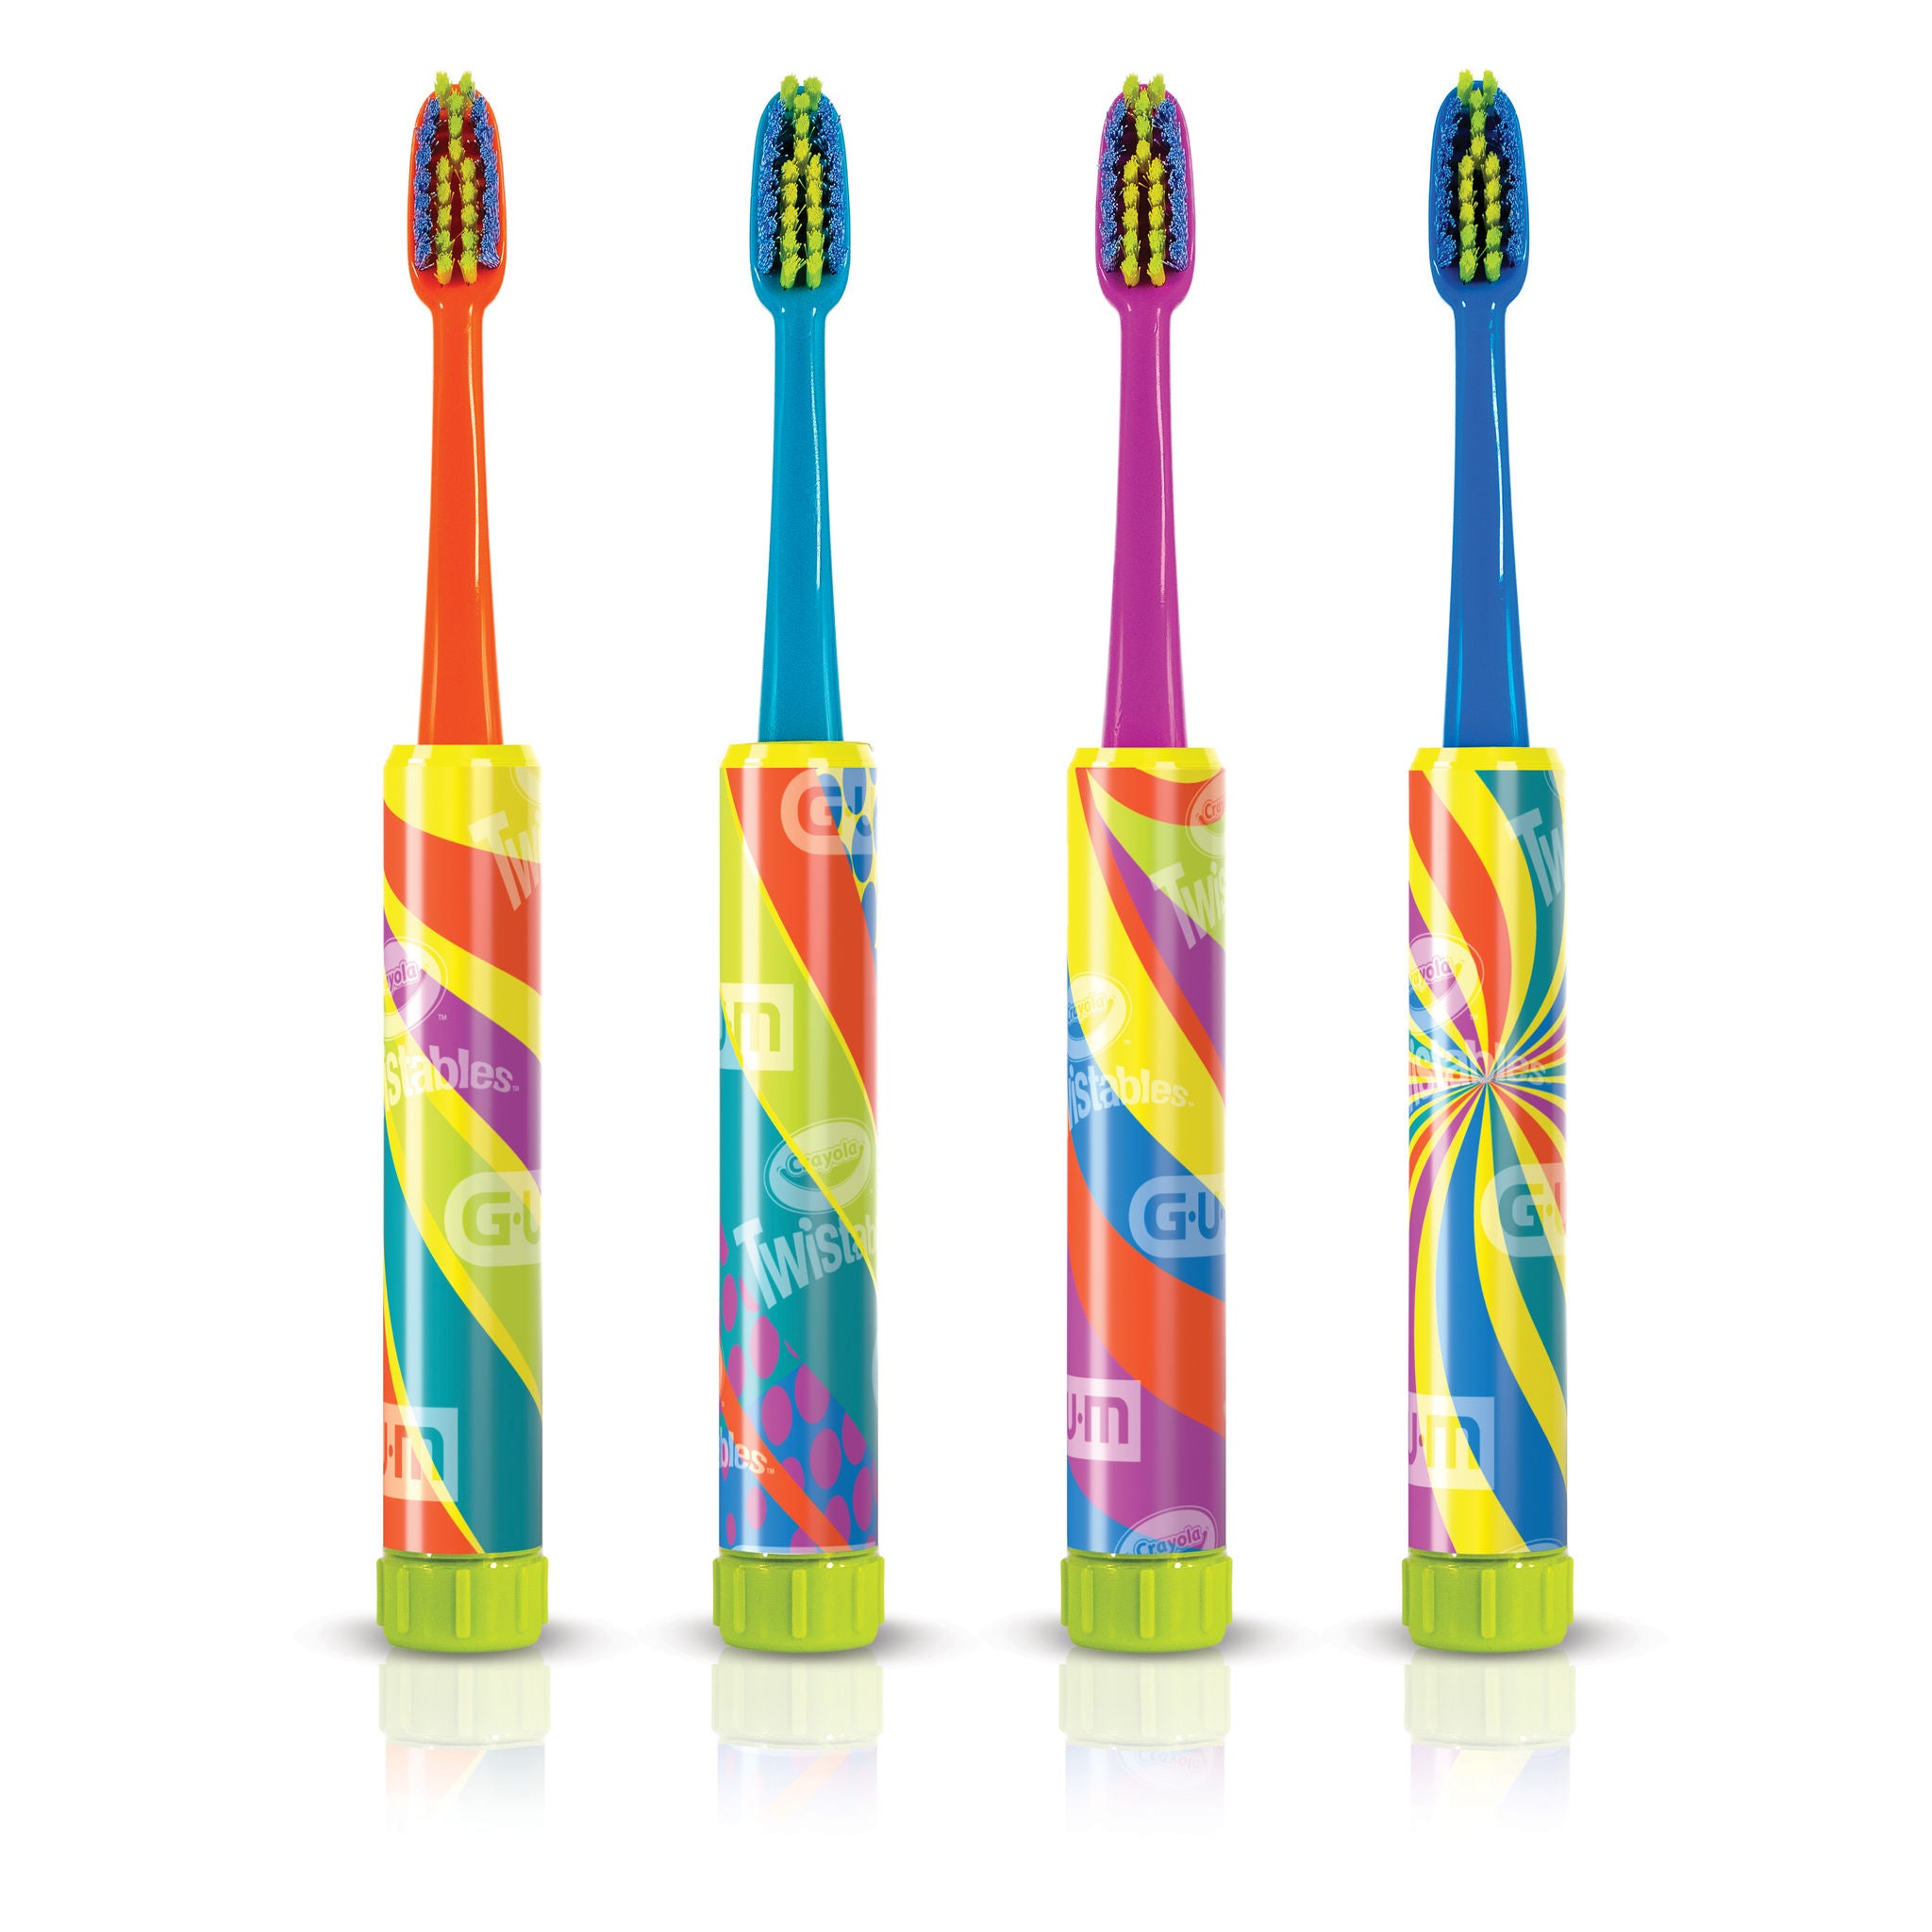 230-Product-Toothbrush-Manual-Crayola-Twistables-naked-4colors.jpg